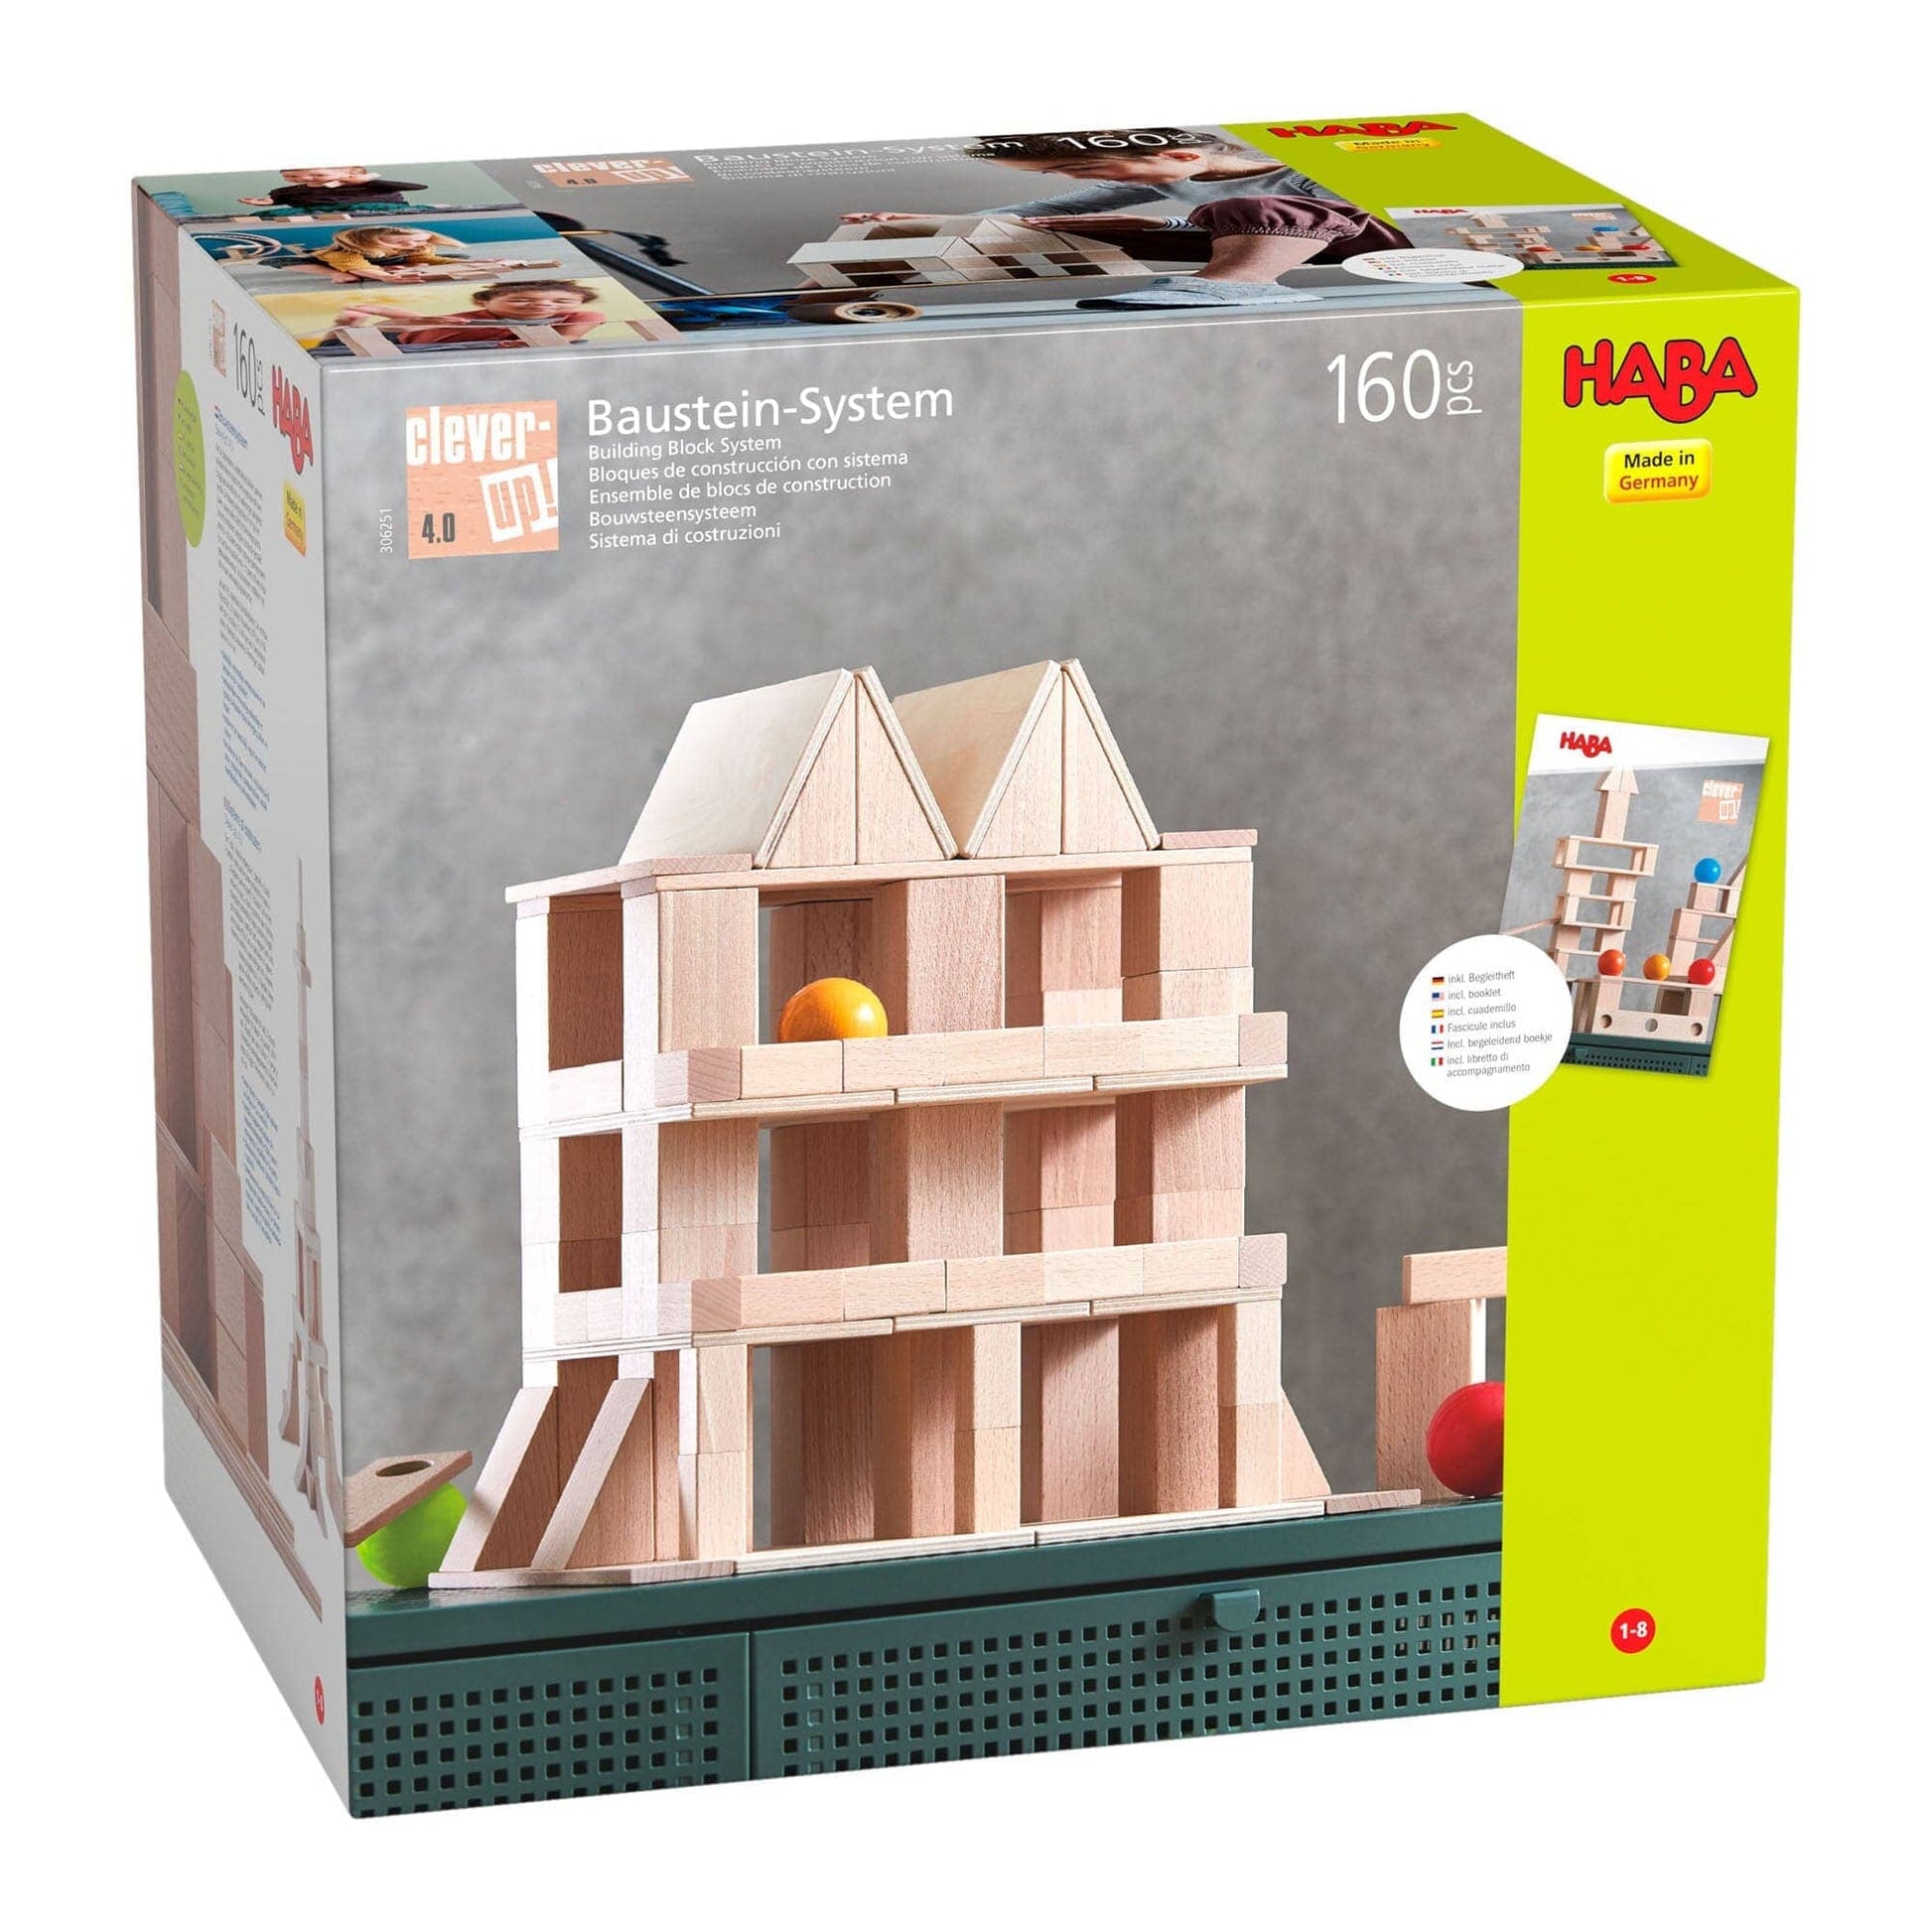 HABA Clever Up! Building Block System 4.0 Blocks 